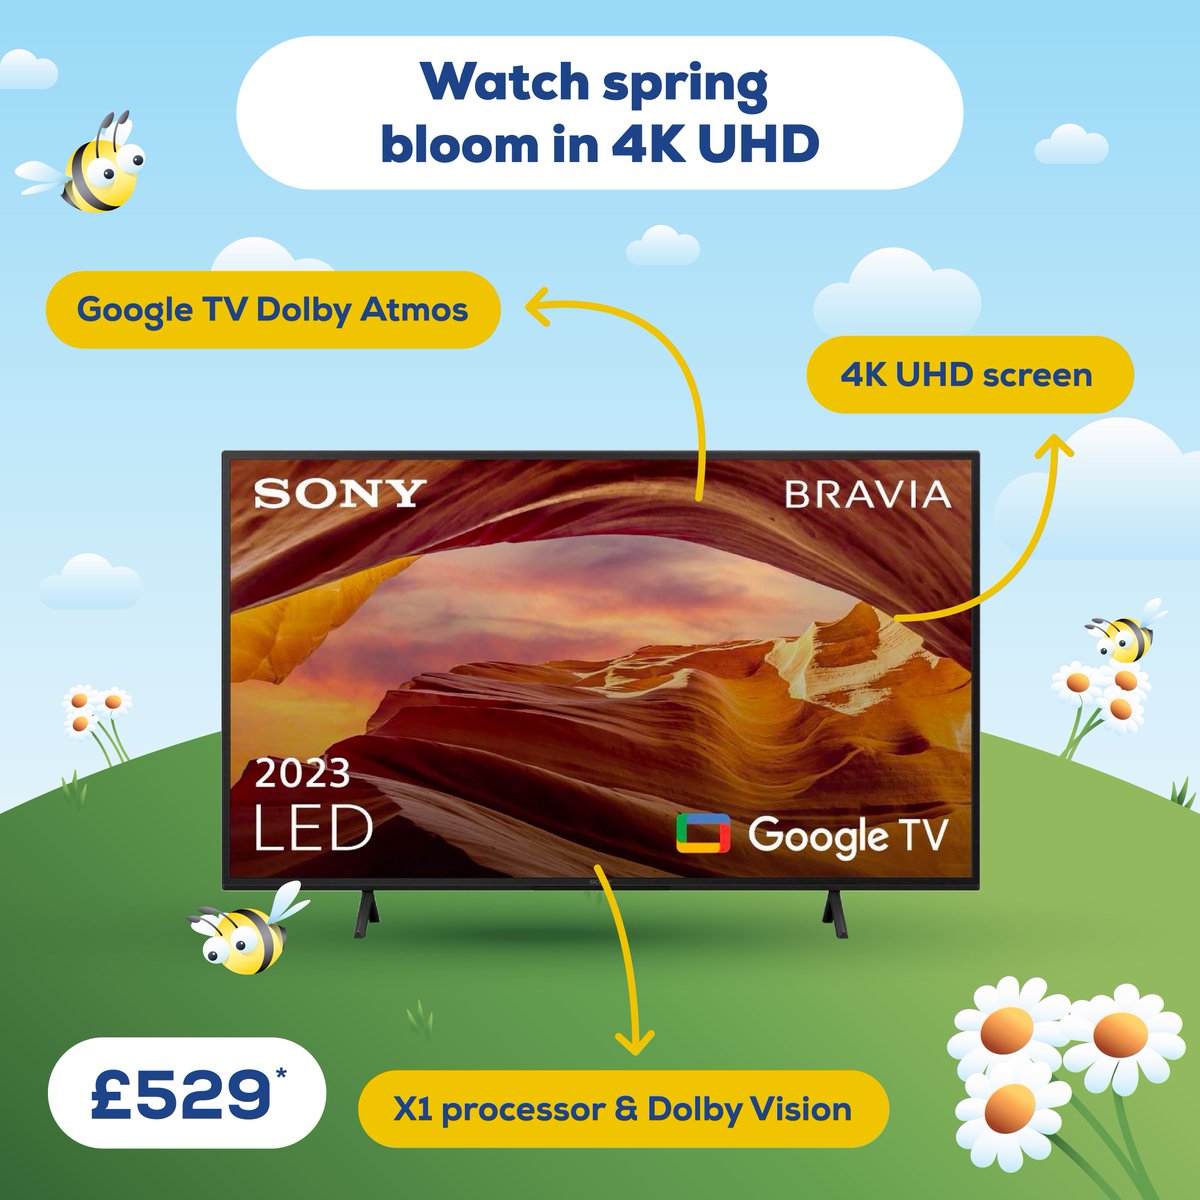 Choose the KD43X75WLPU from #Sony for your home entertainment. Powered by 4K UHD, Dolby Vision, Dolby Atmos, and a X1 processor, content is incredibly detailed with clear audio. Shop our Spring Offers > euronics.la/3JeZSJf #TheHomeofElectricals *Price correct at time of post